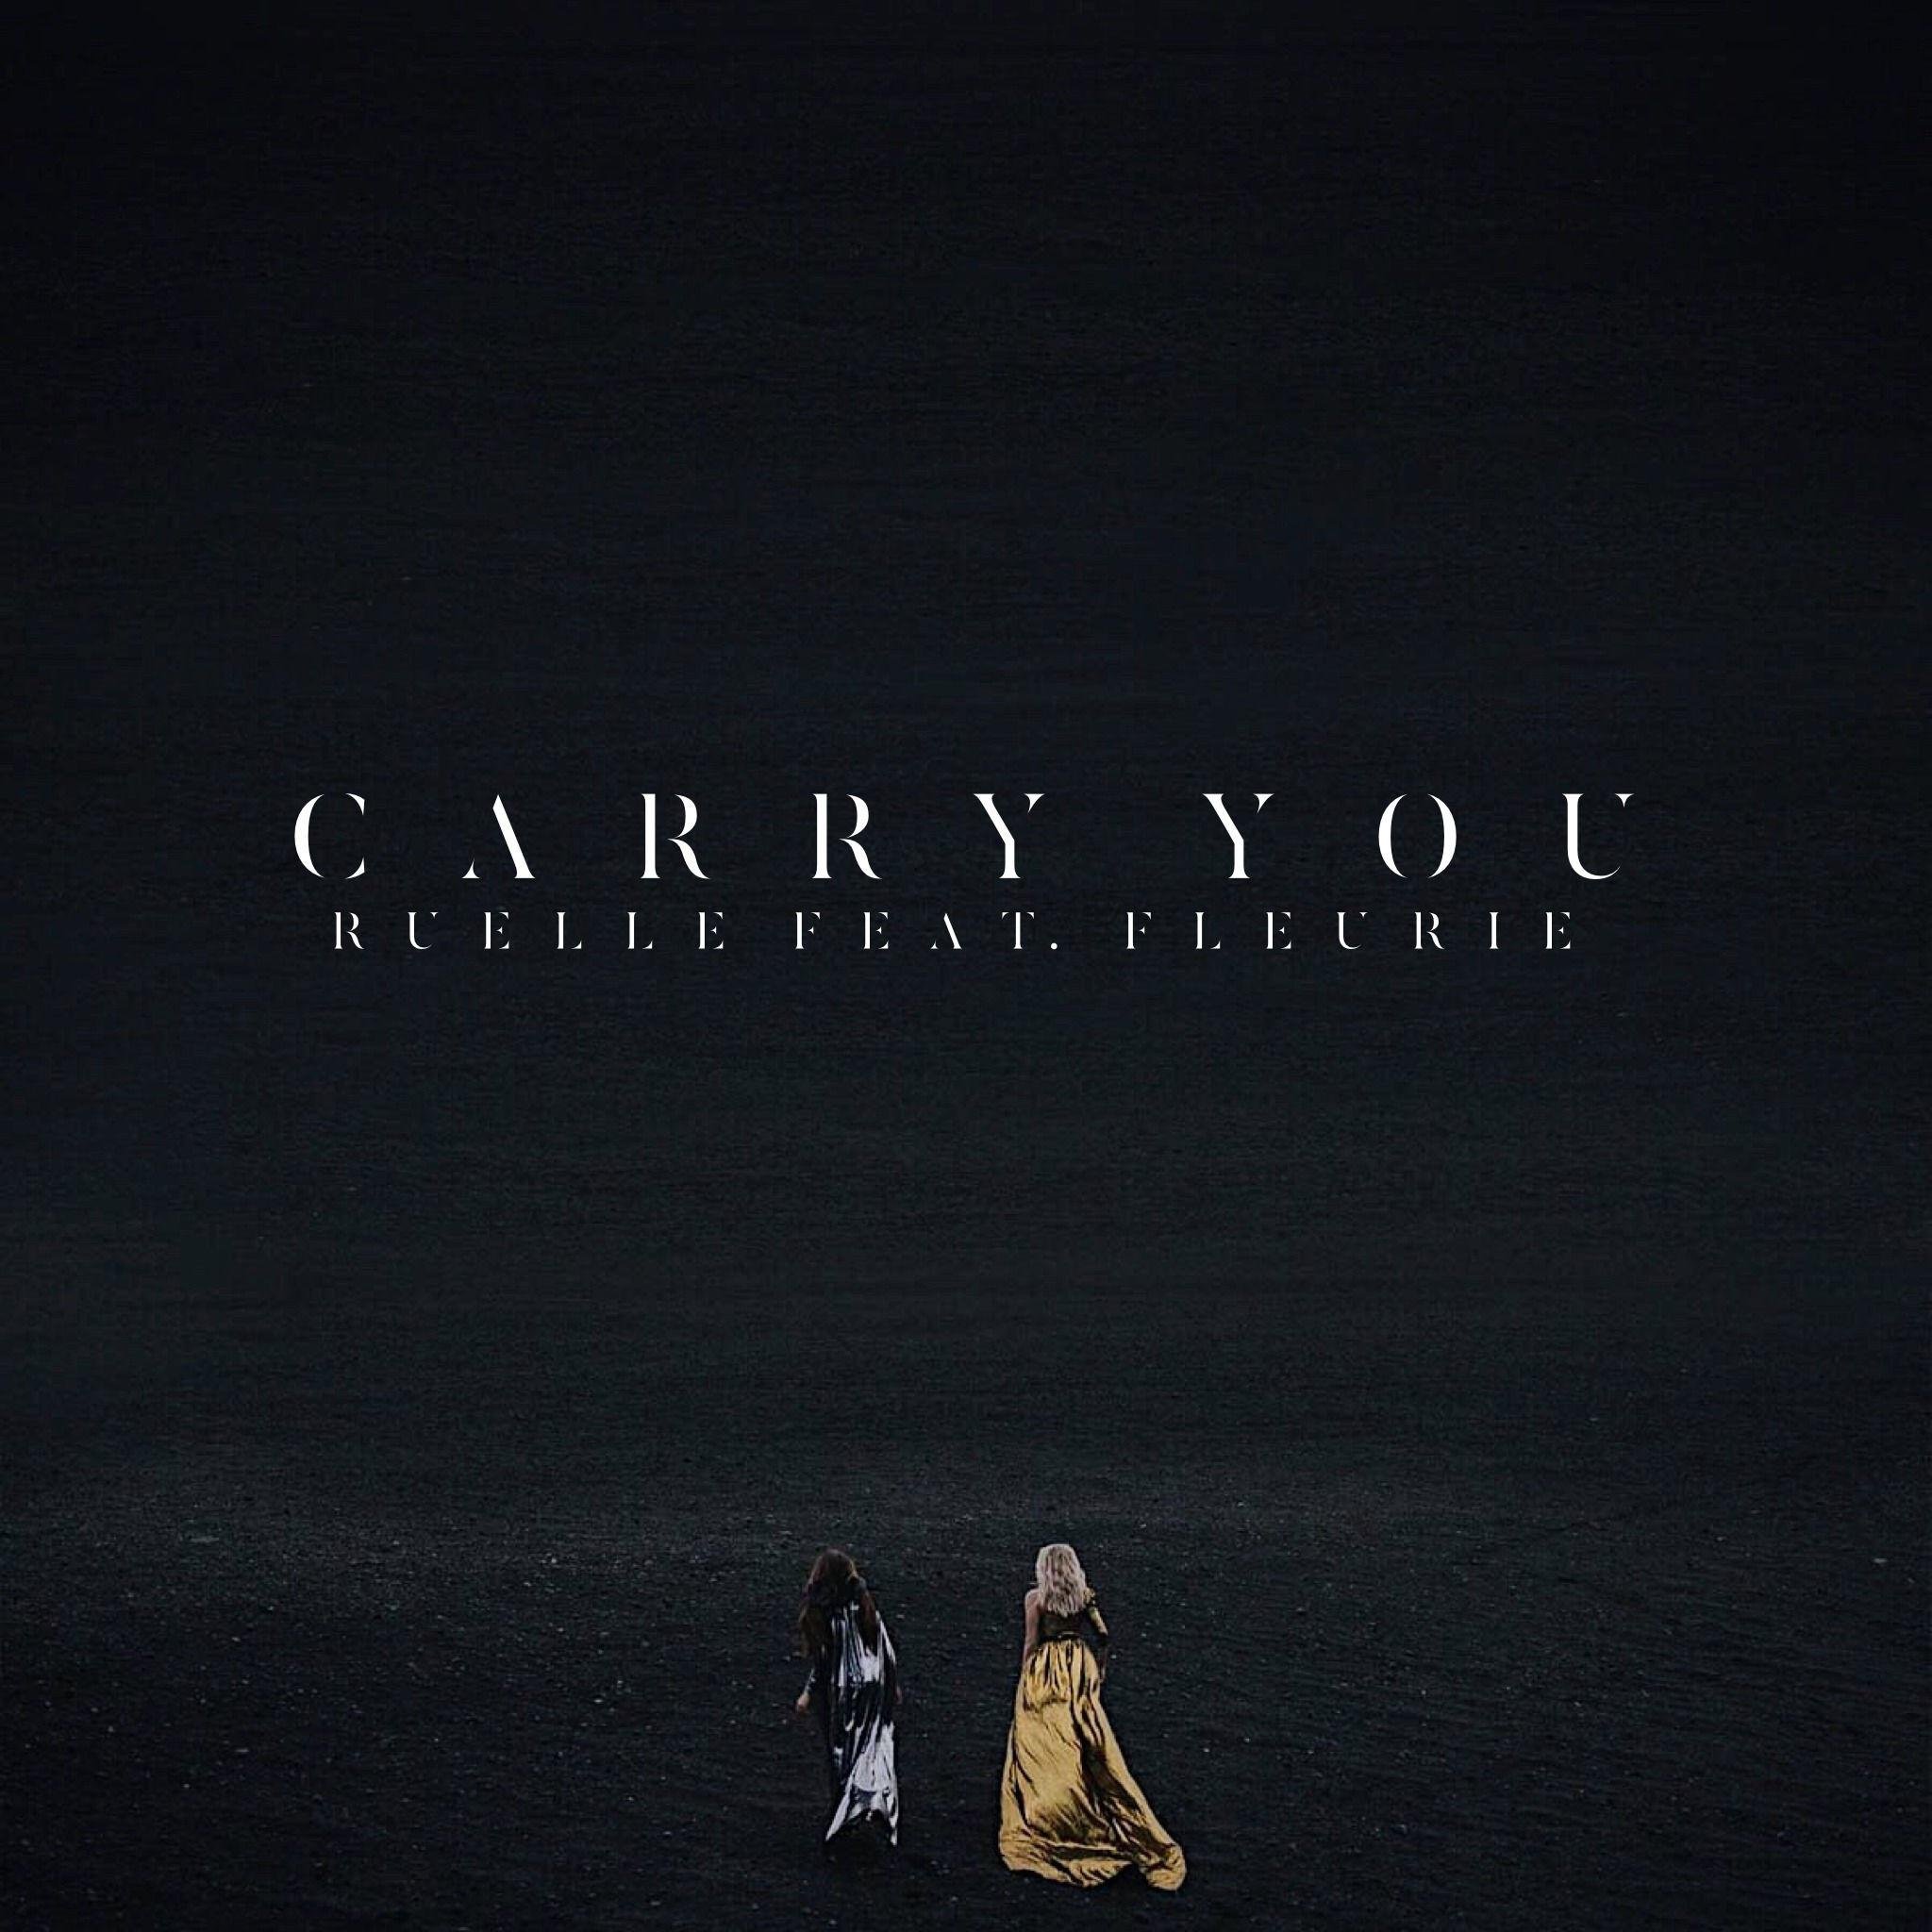 Ruelle/Fleurie《Carry You》[FLAC/MP3-320K]